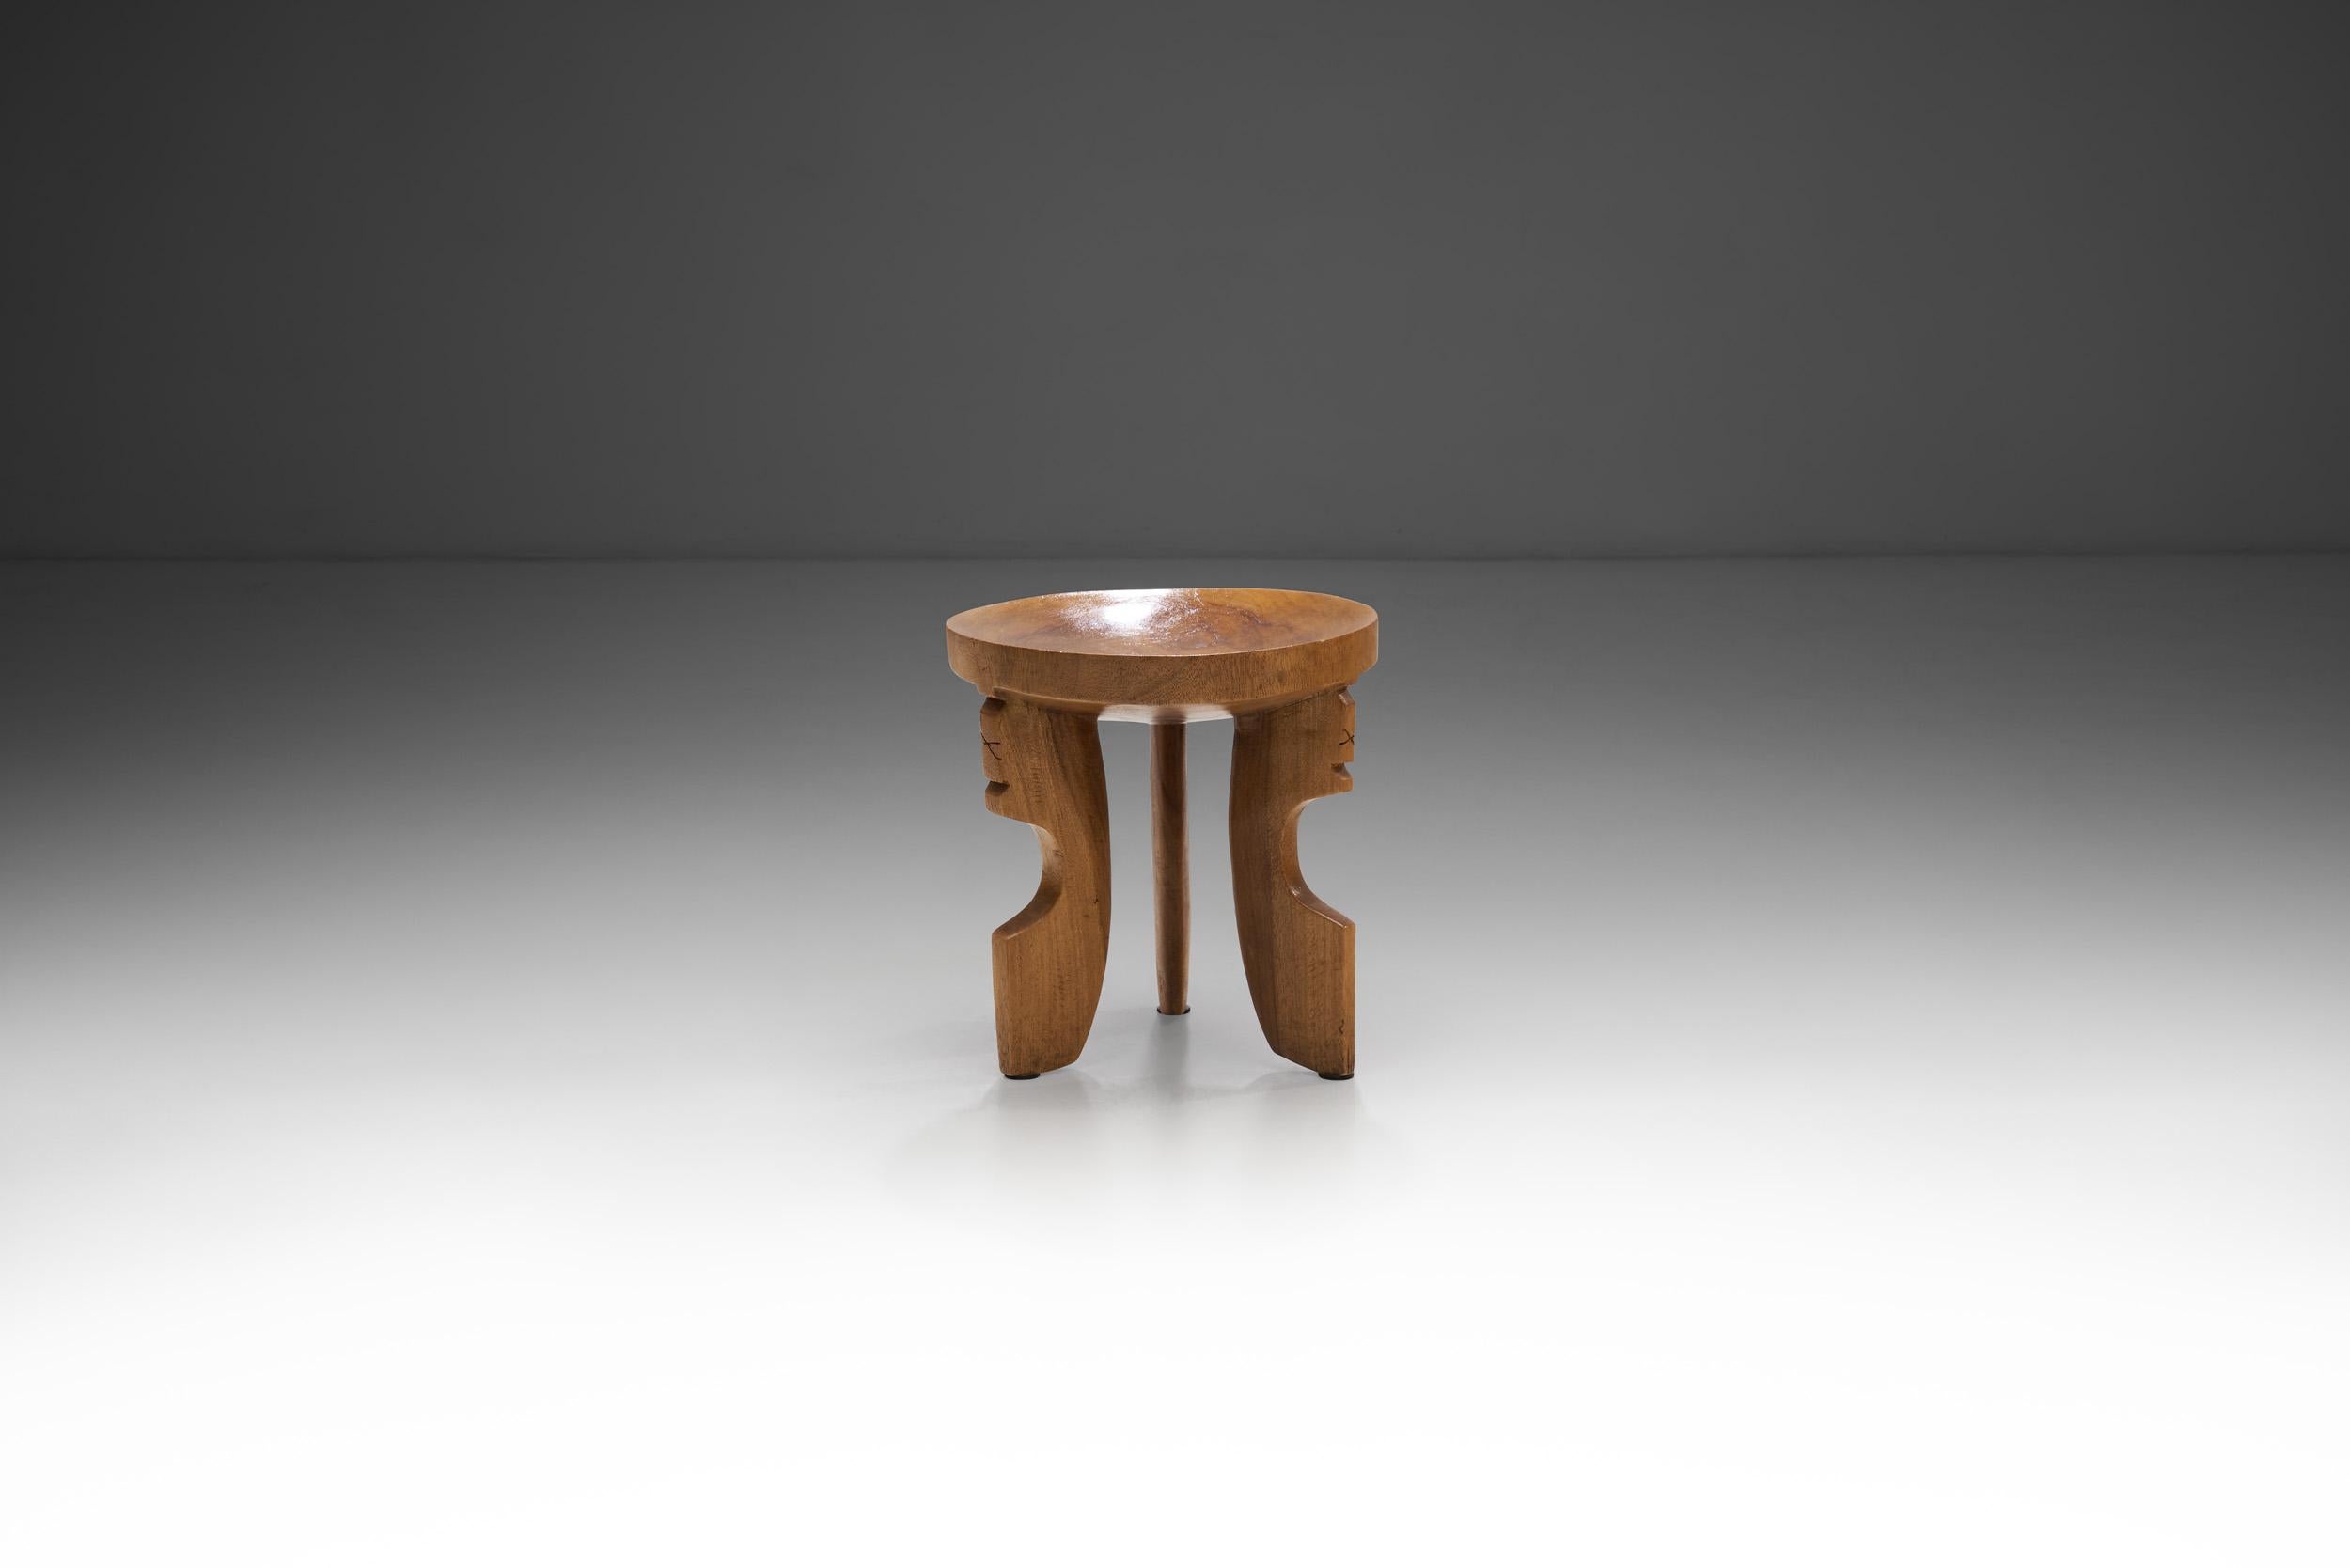 Wooden stools have been widespread in Europe during much of the past centuries, the 20th century being no exception. Like other Scandinavian stools, Norwegian pieces have diverse functions – such as household or decorative objects (more recently).